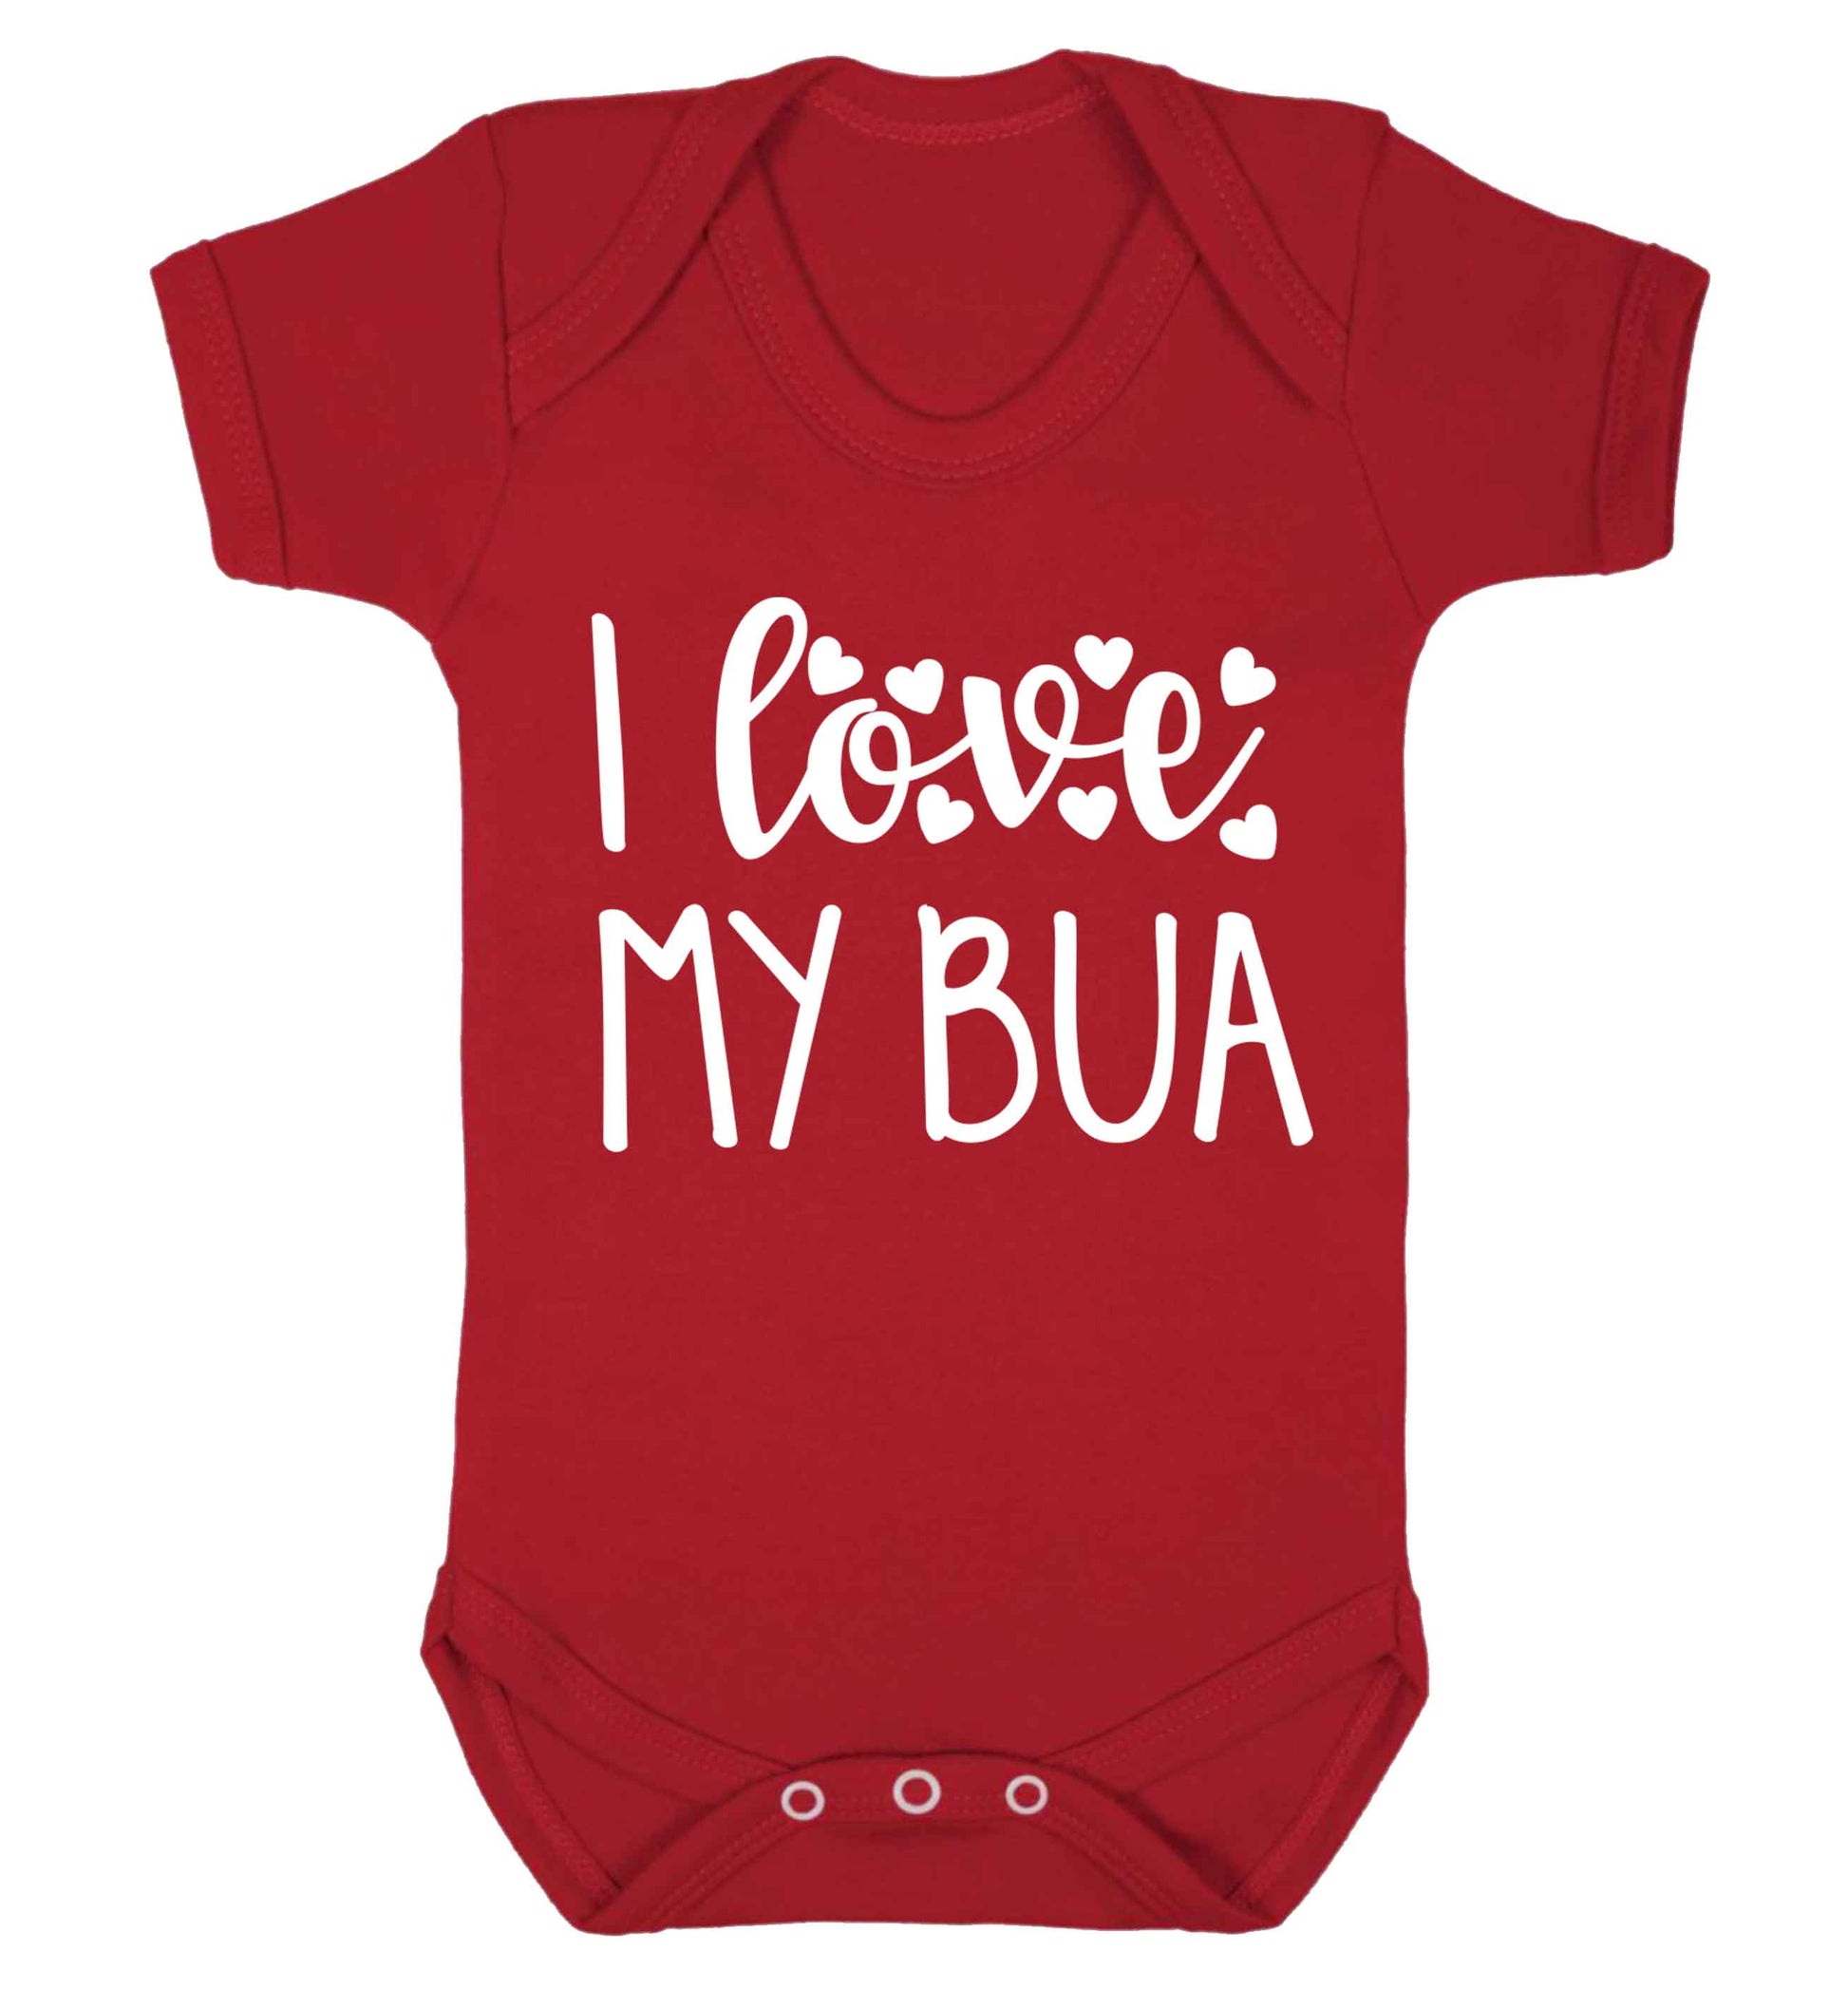 I love my bua Baby Vest red 18-24 months